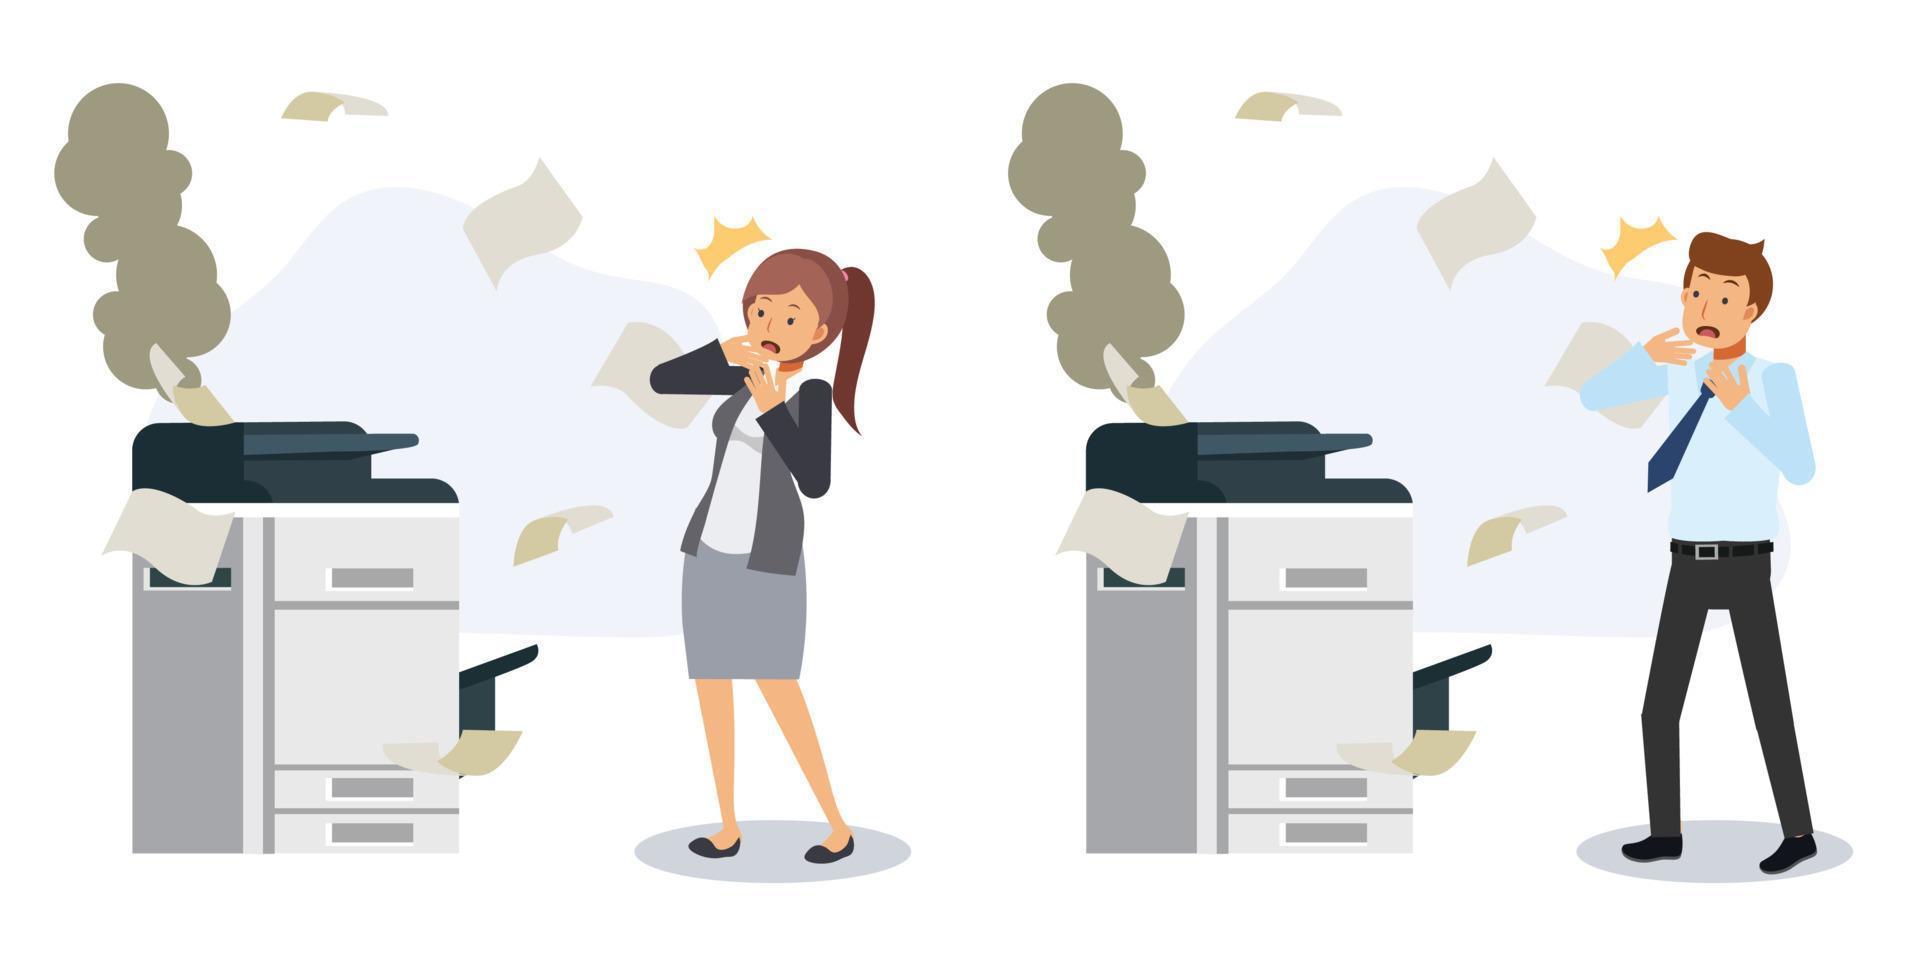 https://static.vecteezy.com/system/resources/previews/004/749/412/non_2x/business-people-in-office-concept-problem-at-office-broken-printer-messy-office-equipment-flat-2d-cartoon-character-illustration-vector.jpg